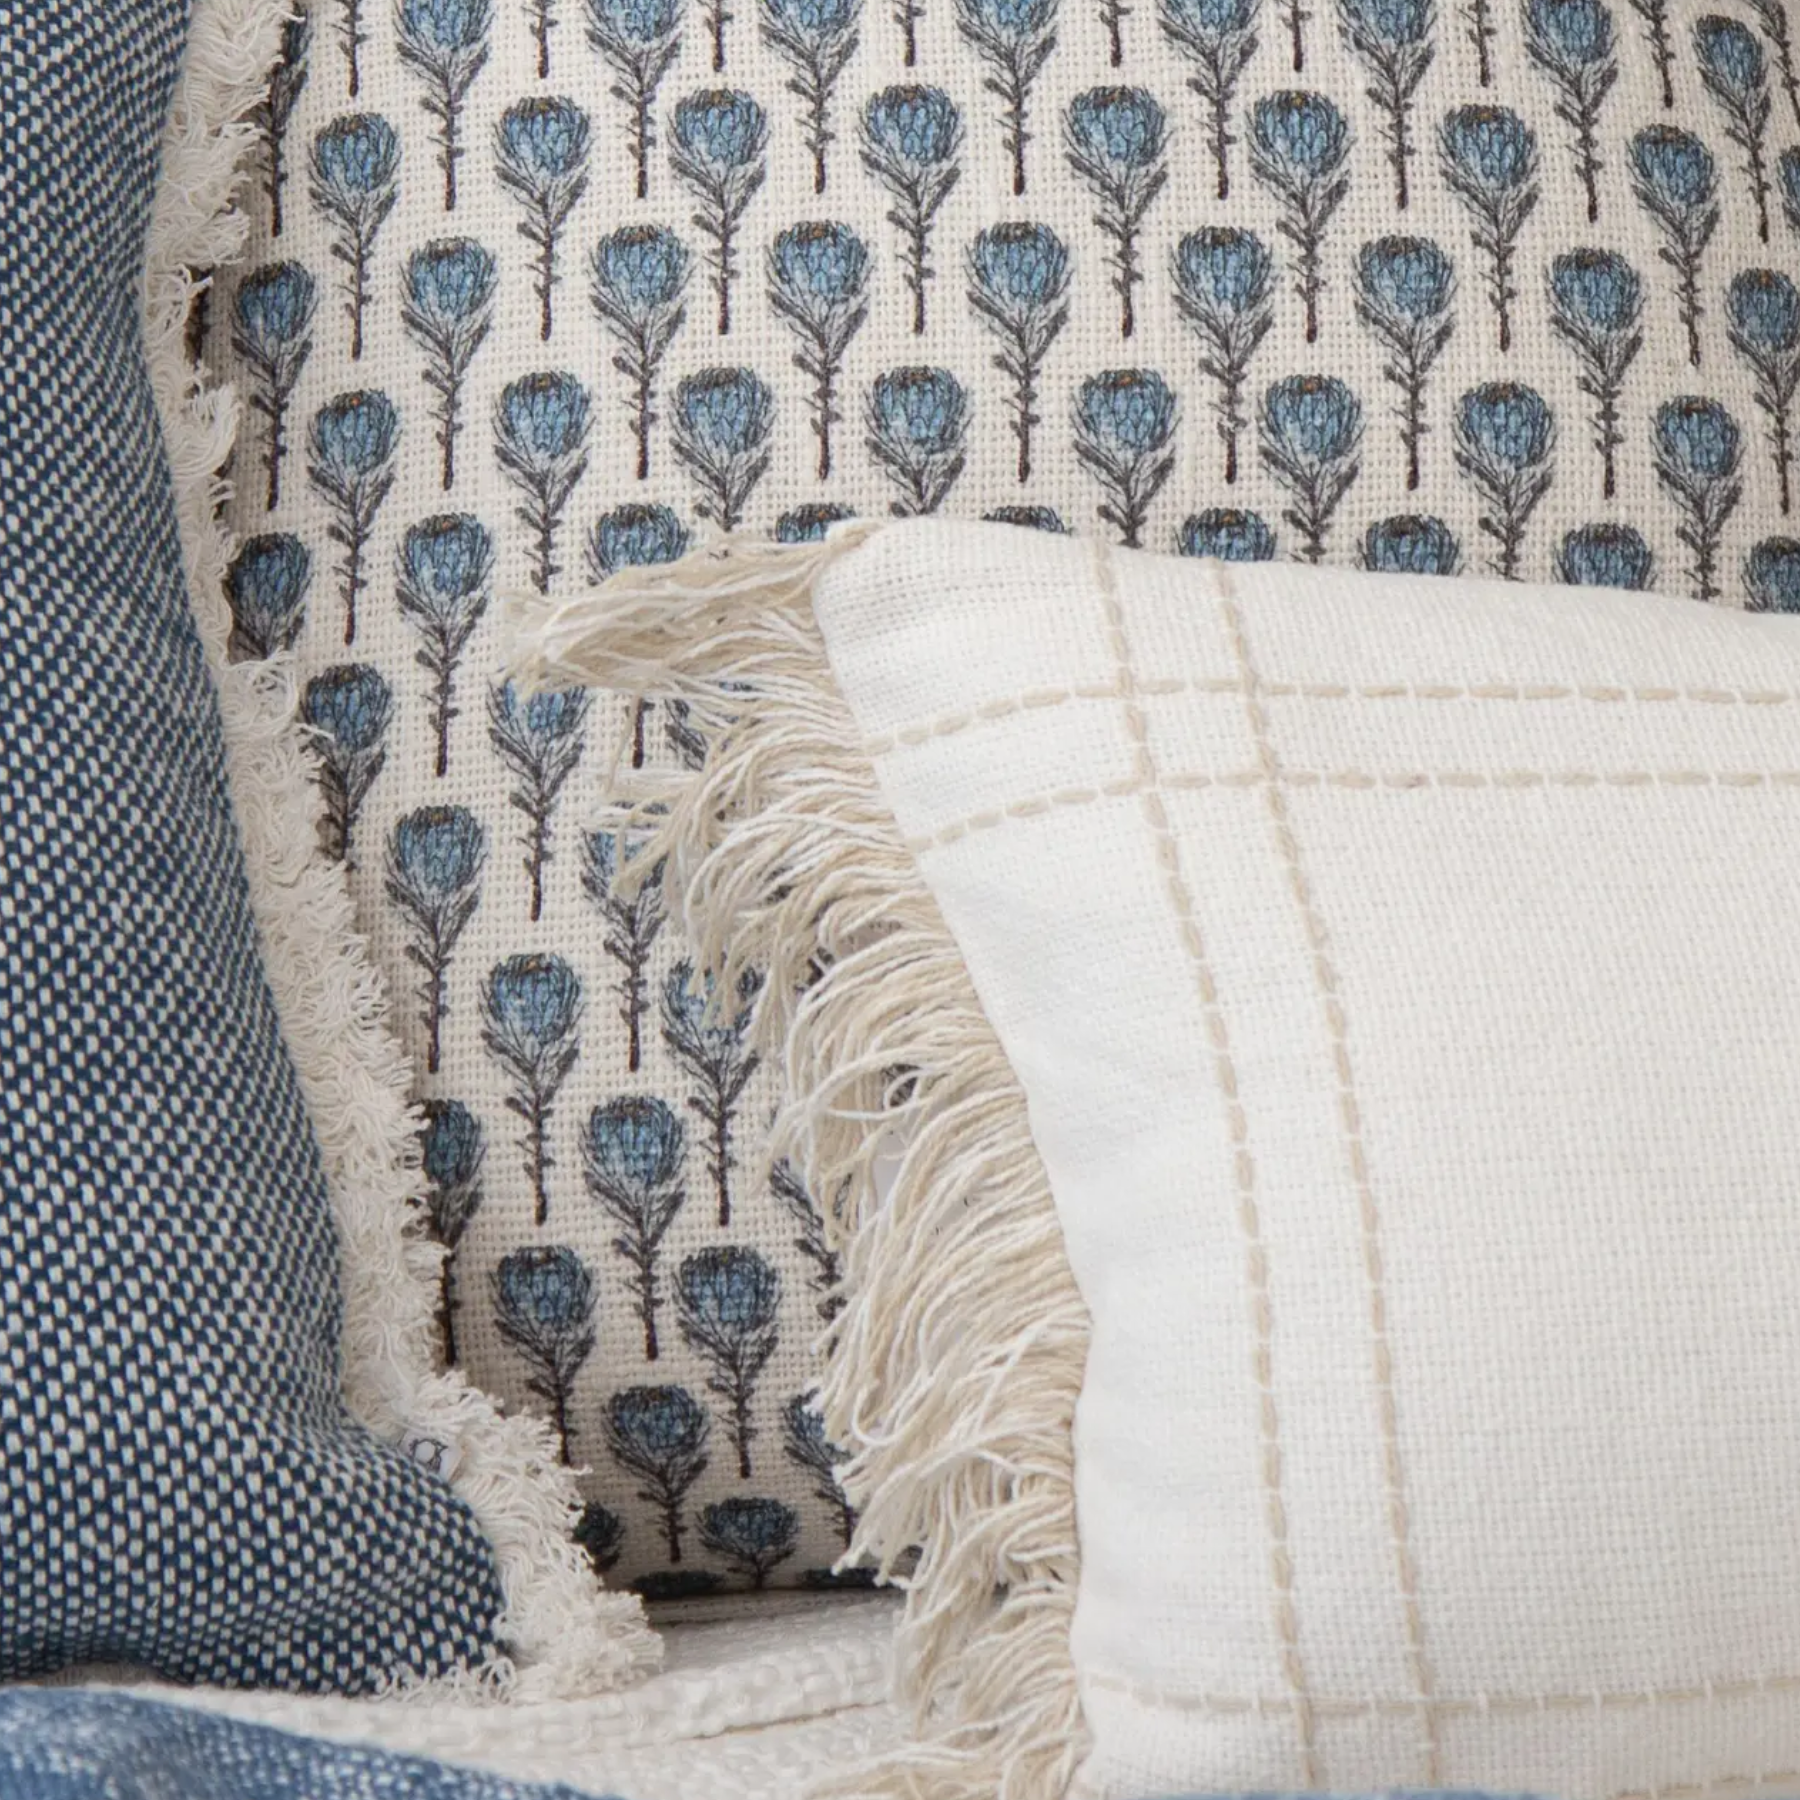 Crosshatch Pillow Cover - Oatmeal